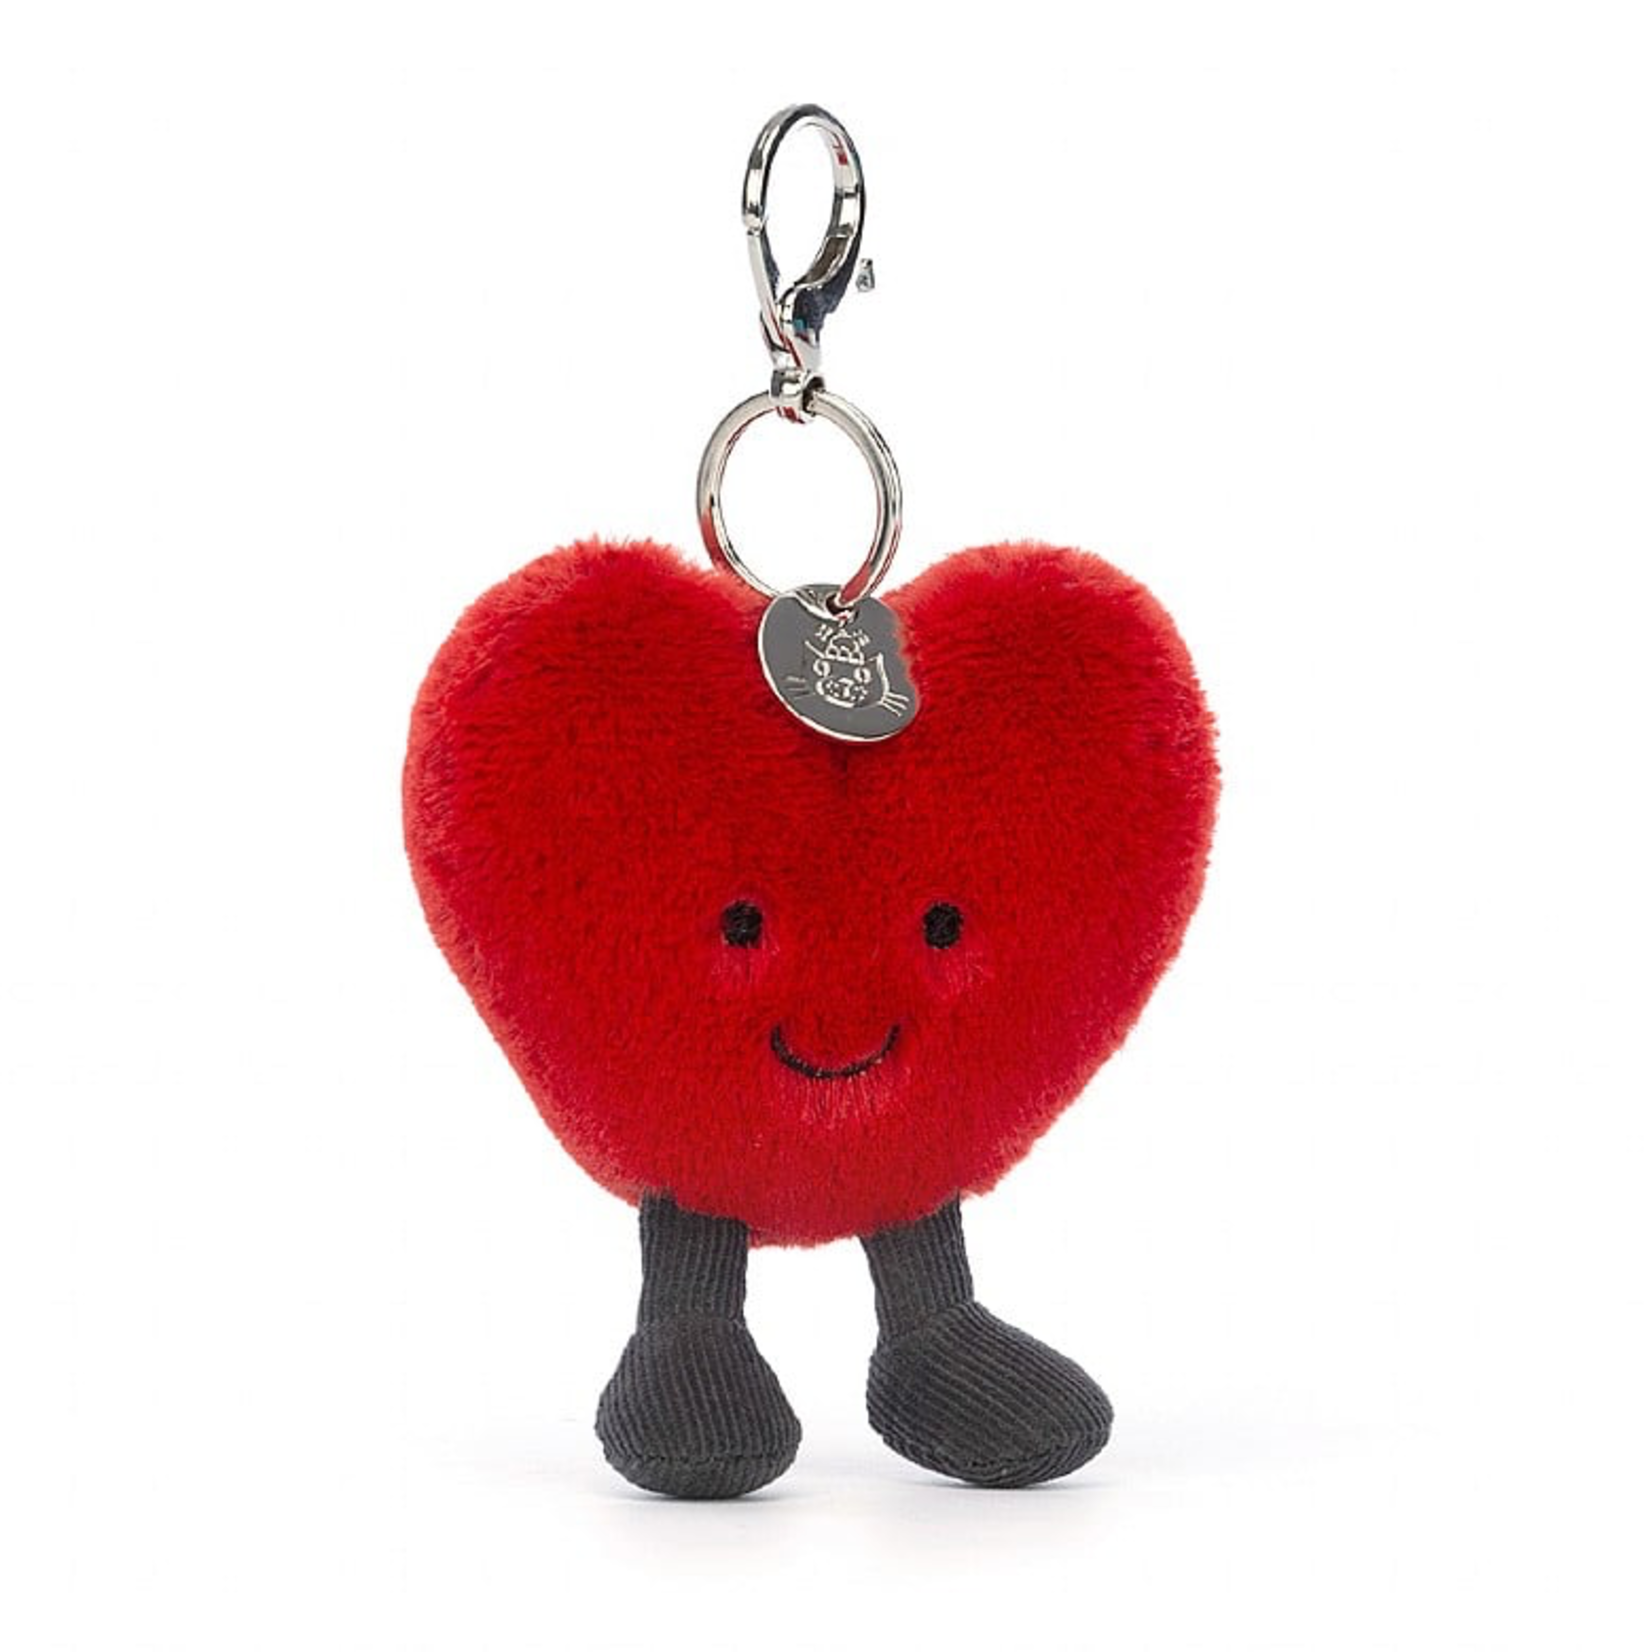 Jellycat - Bag Charms Jellycat - Amuseable Red Heart Bag Charm